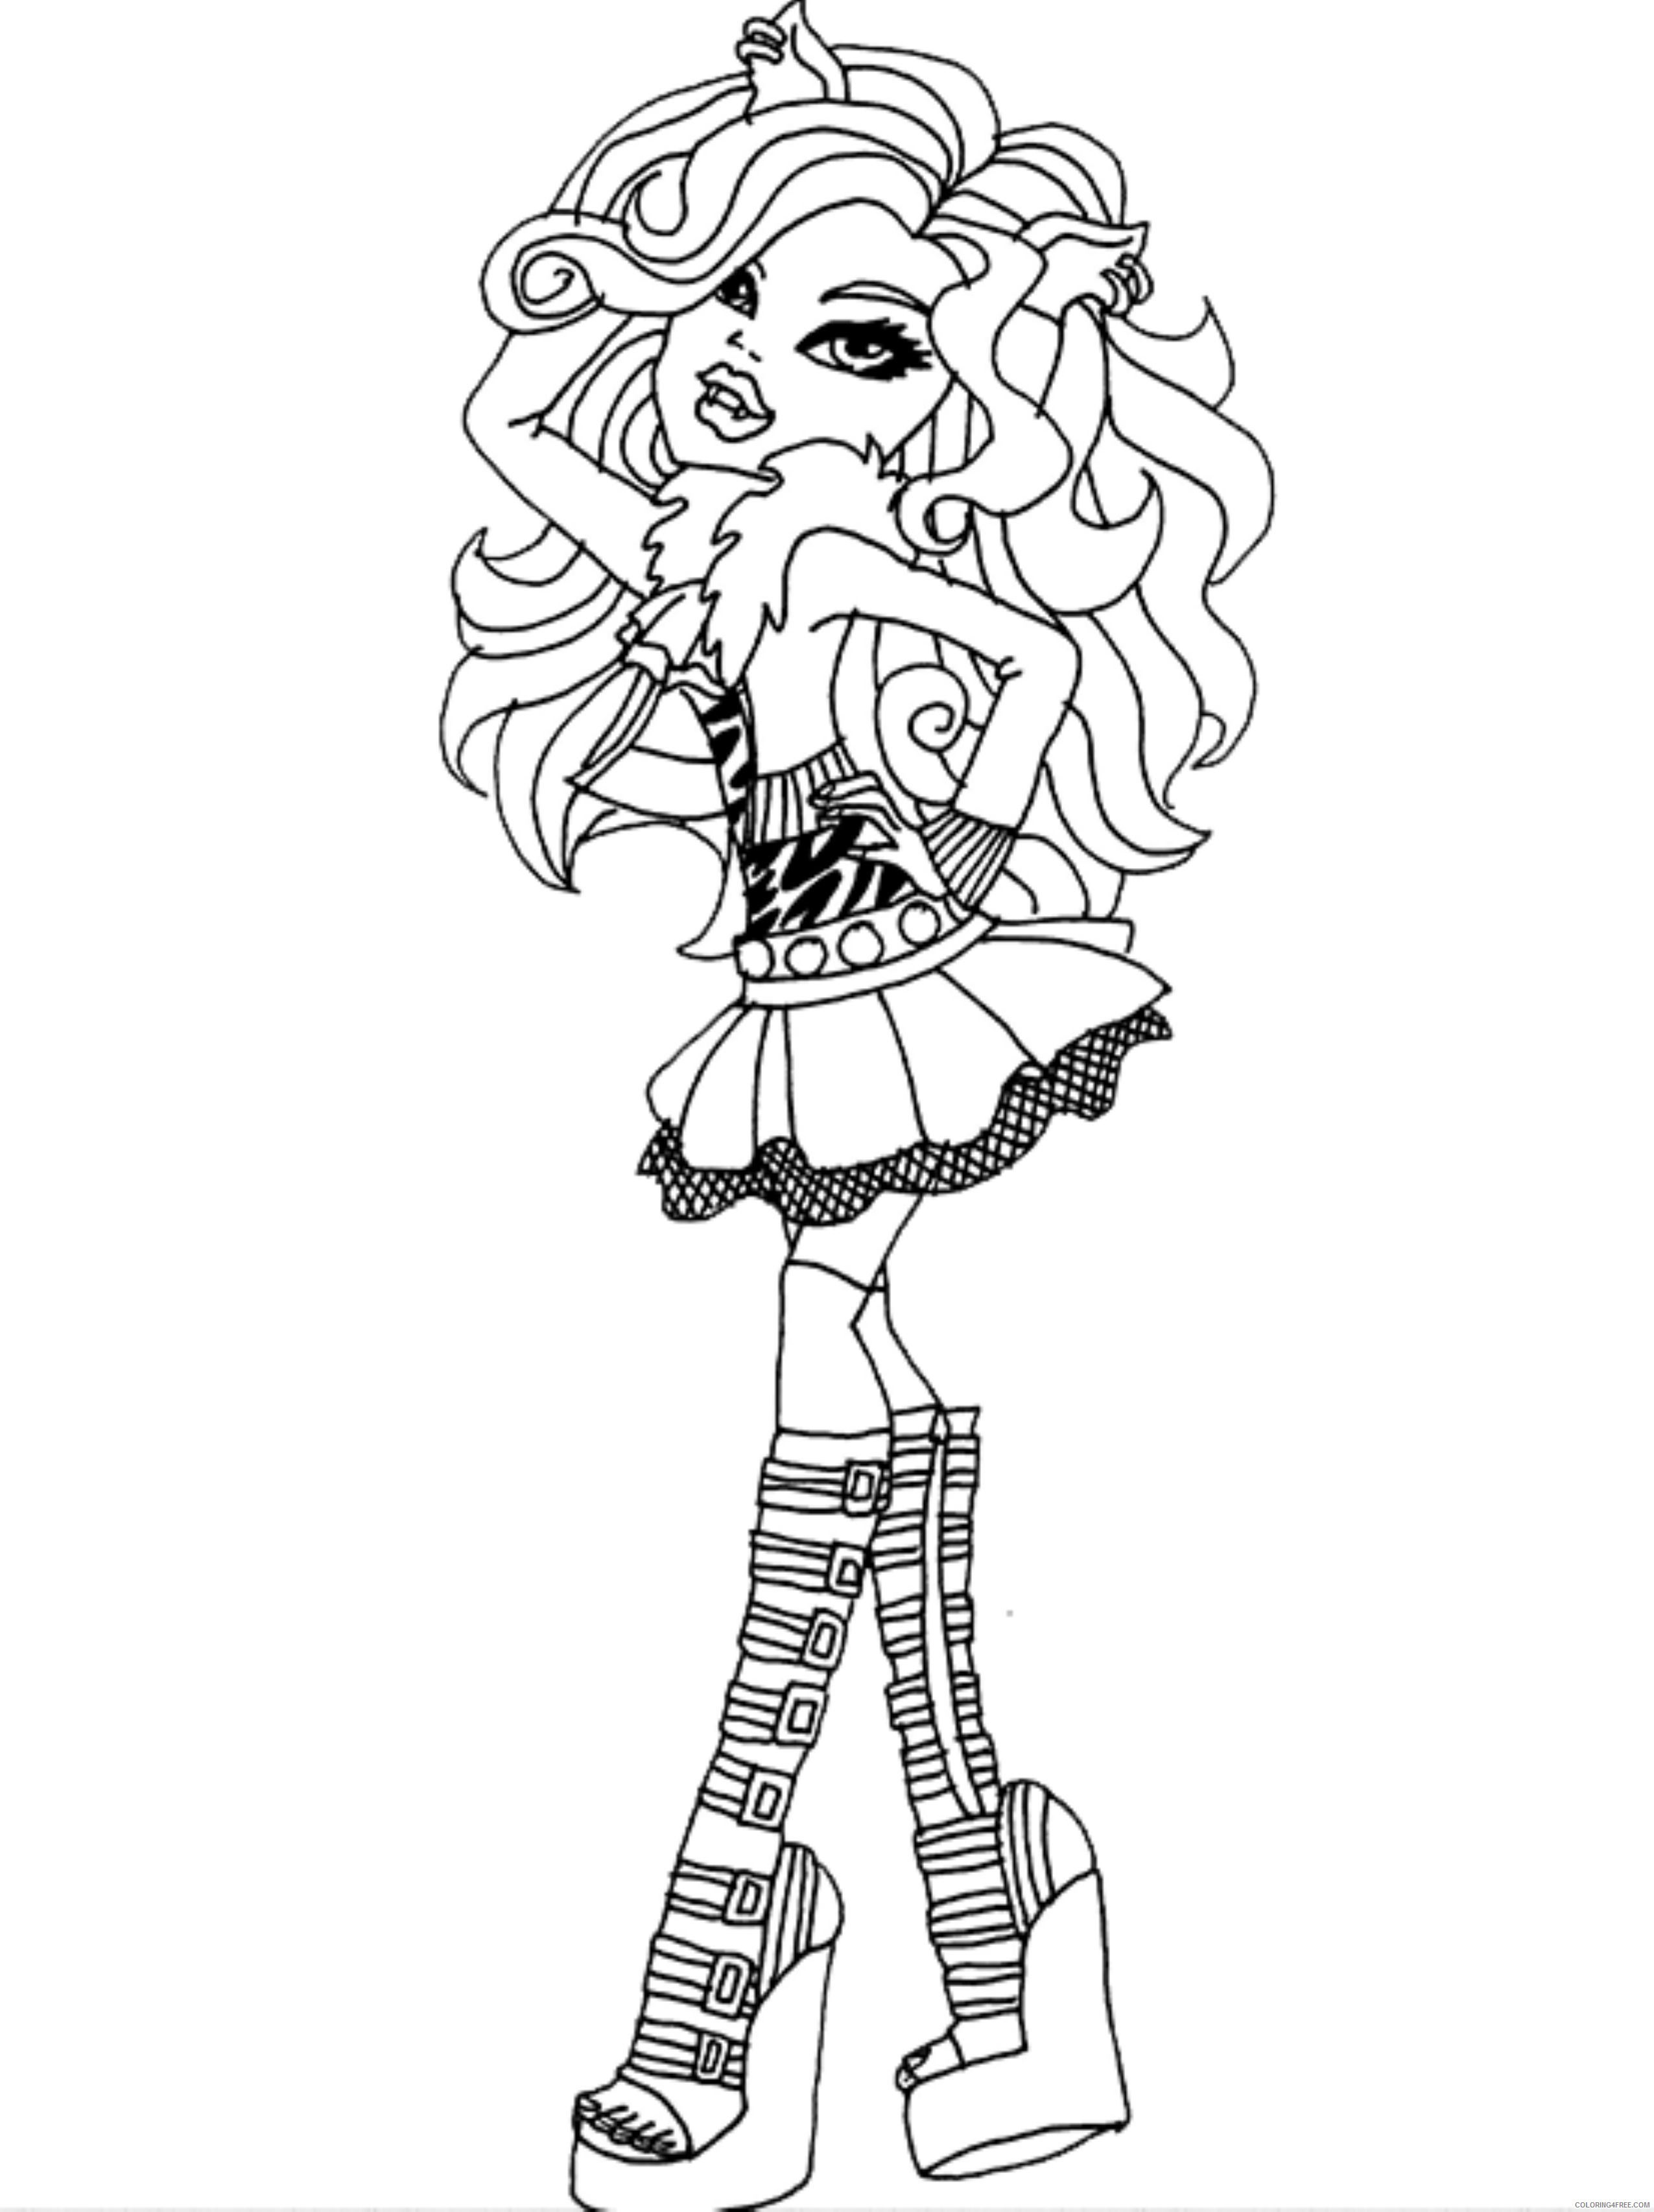 monster high clawdeen wolf coloring pages Coloring4free